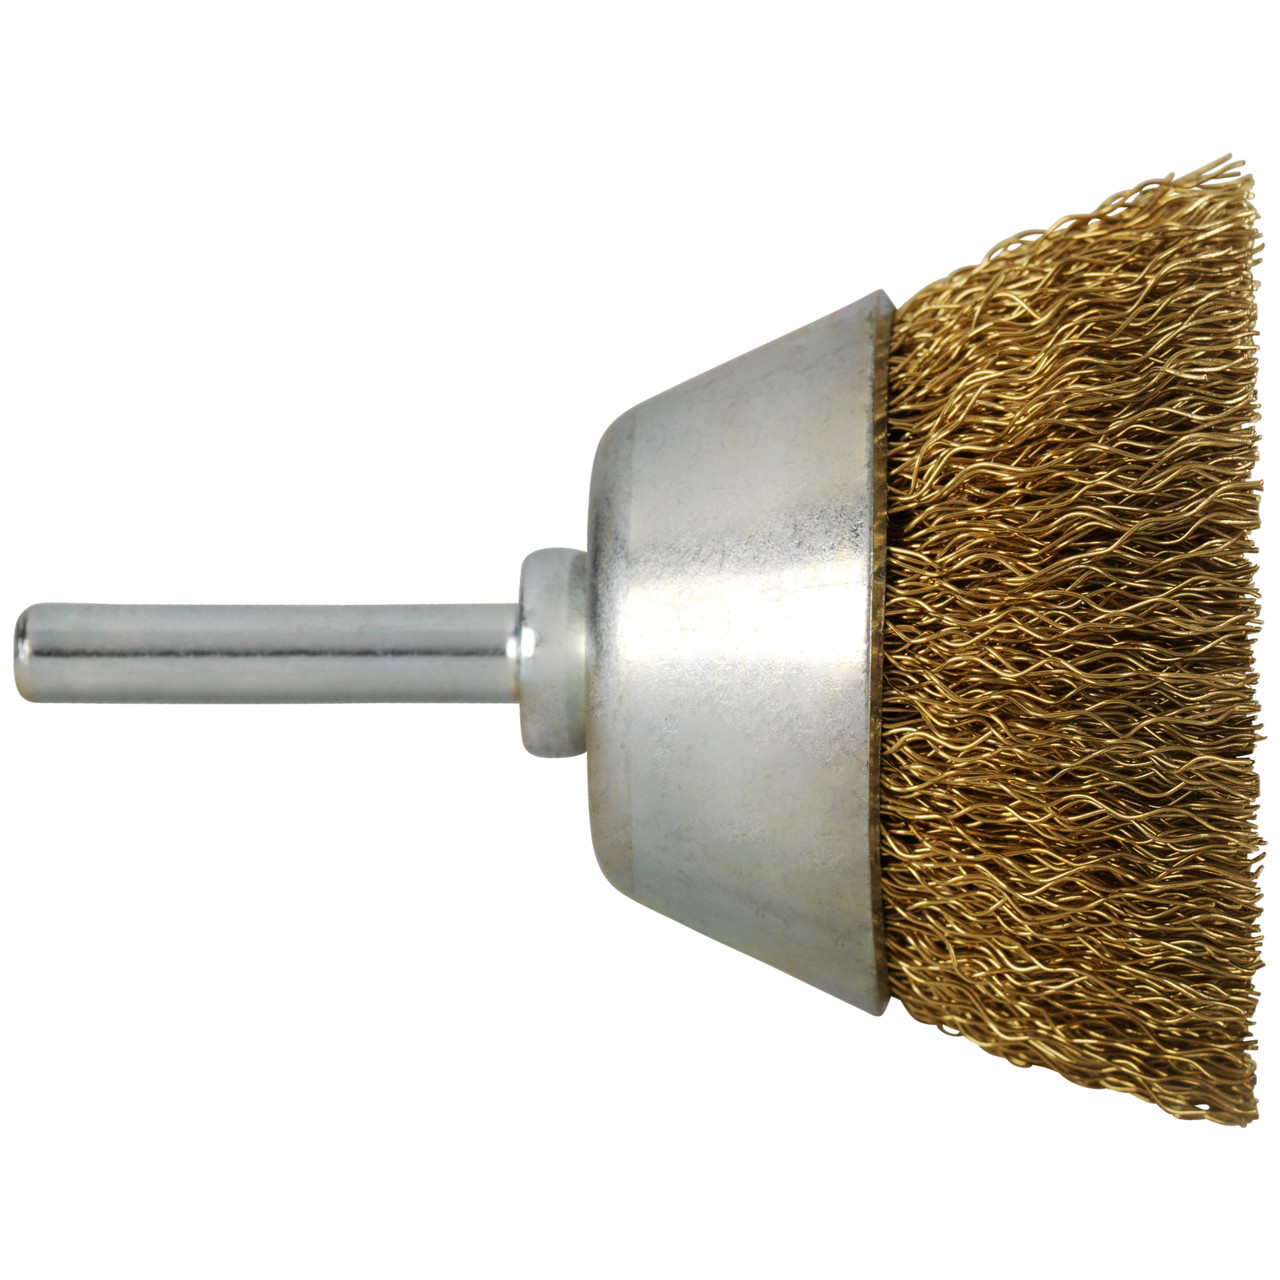 TYROLIT Cup brushes DxLxH-GExI 60x15x20-6x30 For non-ferrous metals, shape: 52TDW - (cup brushes), Art. 23469